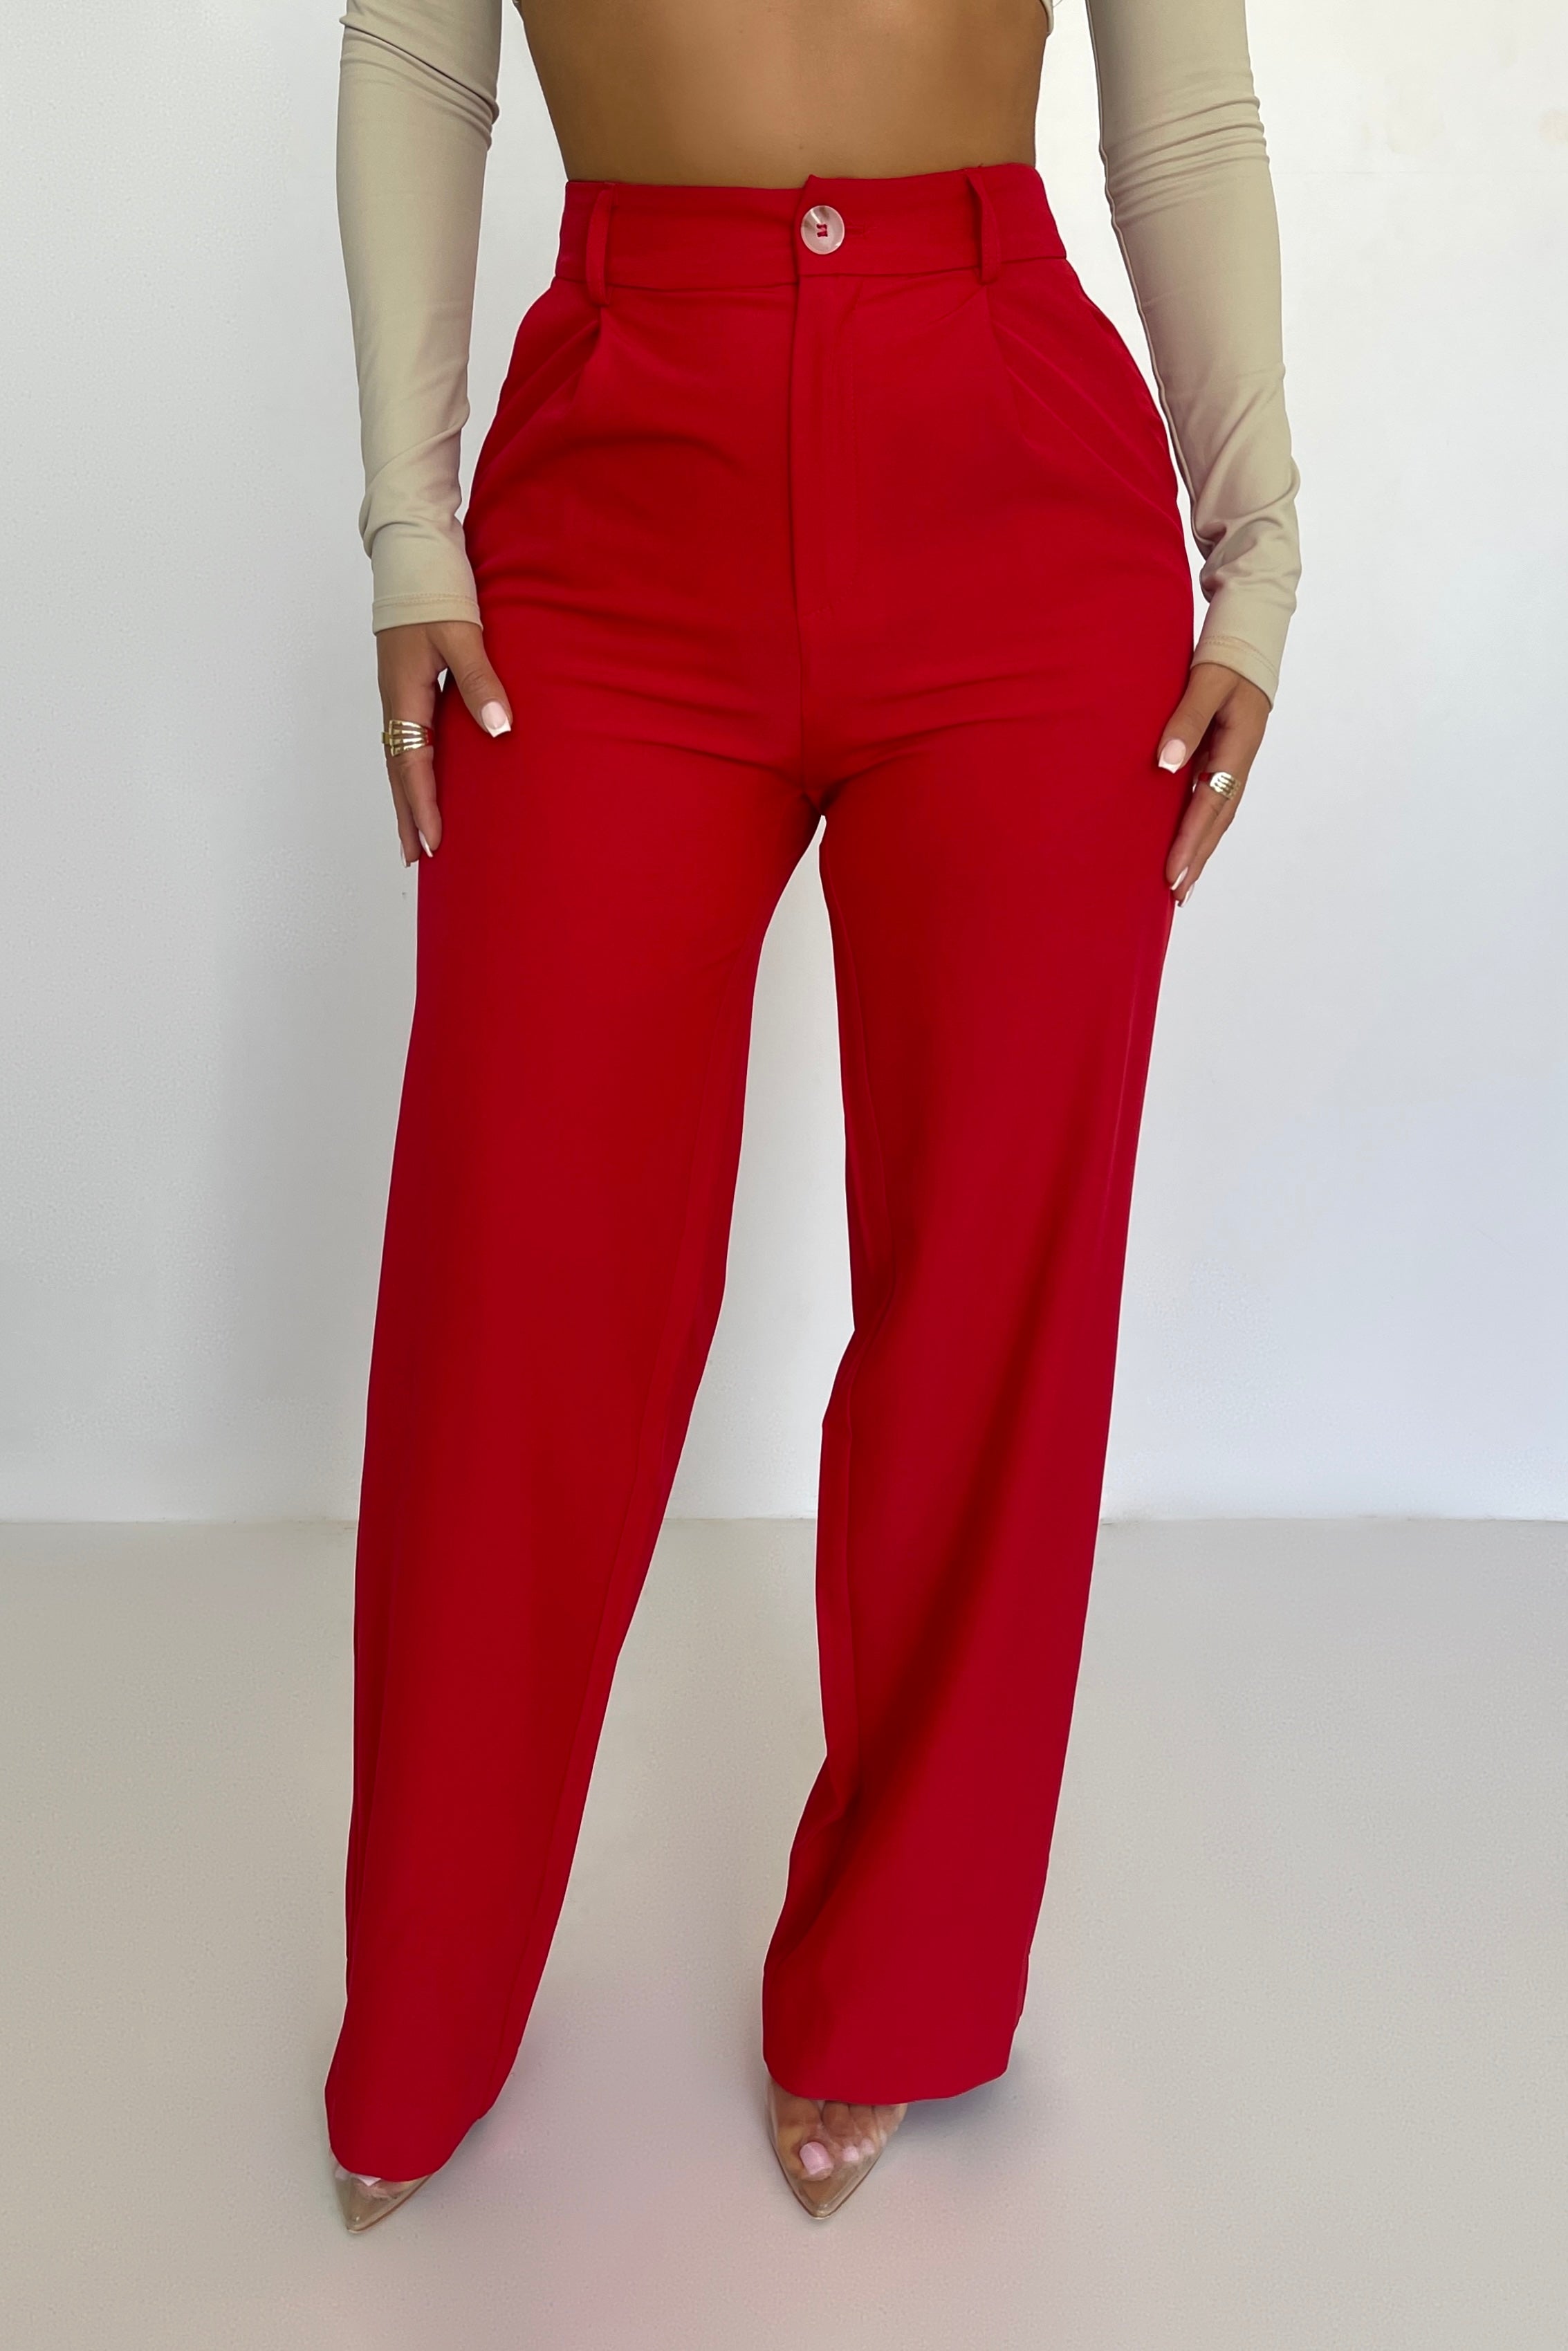 Brave Red Pants